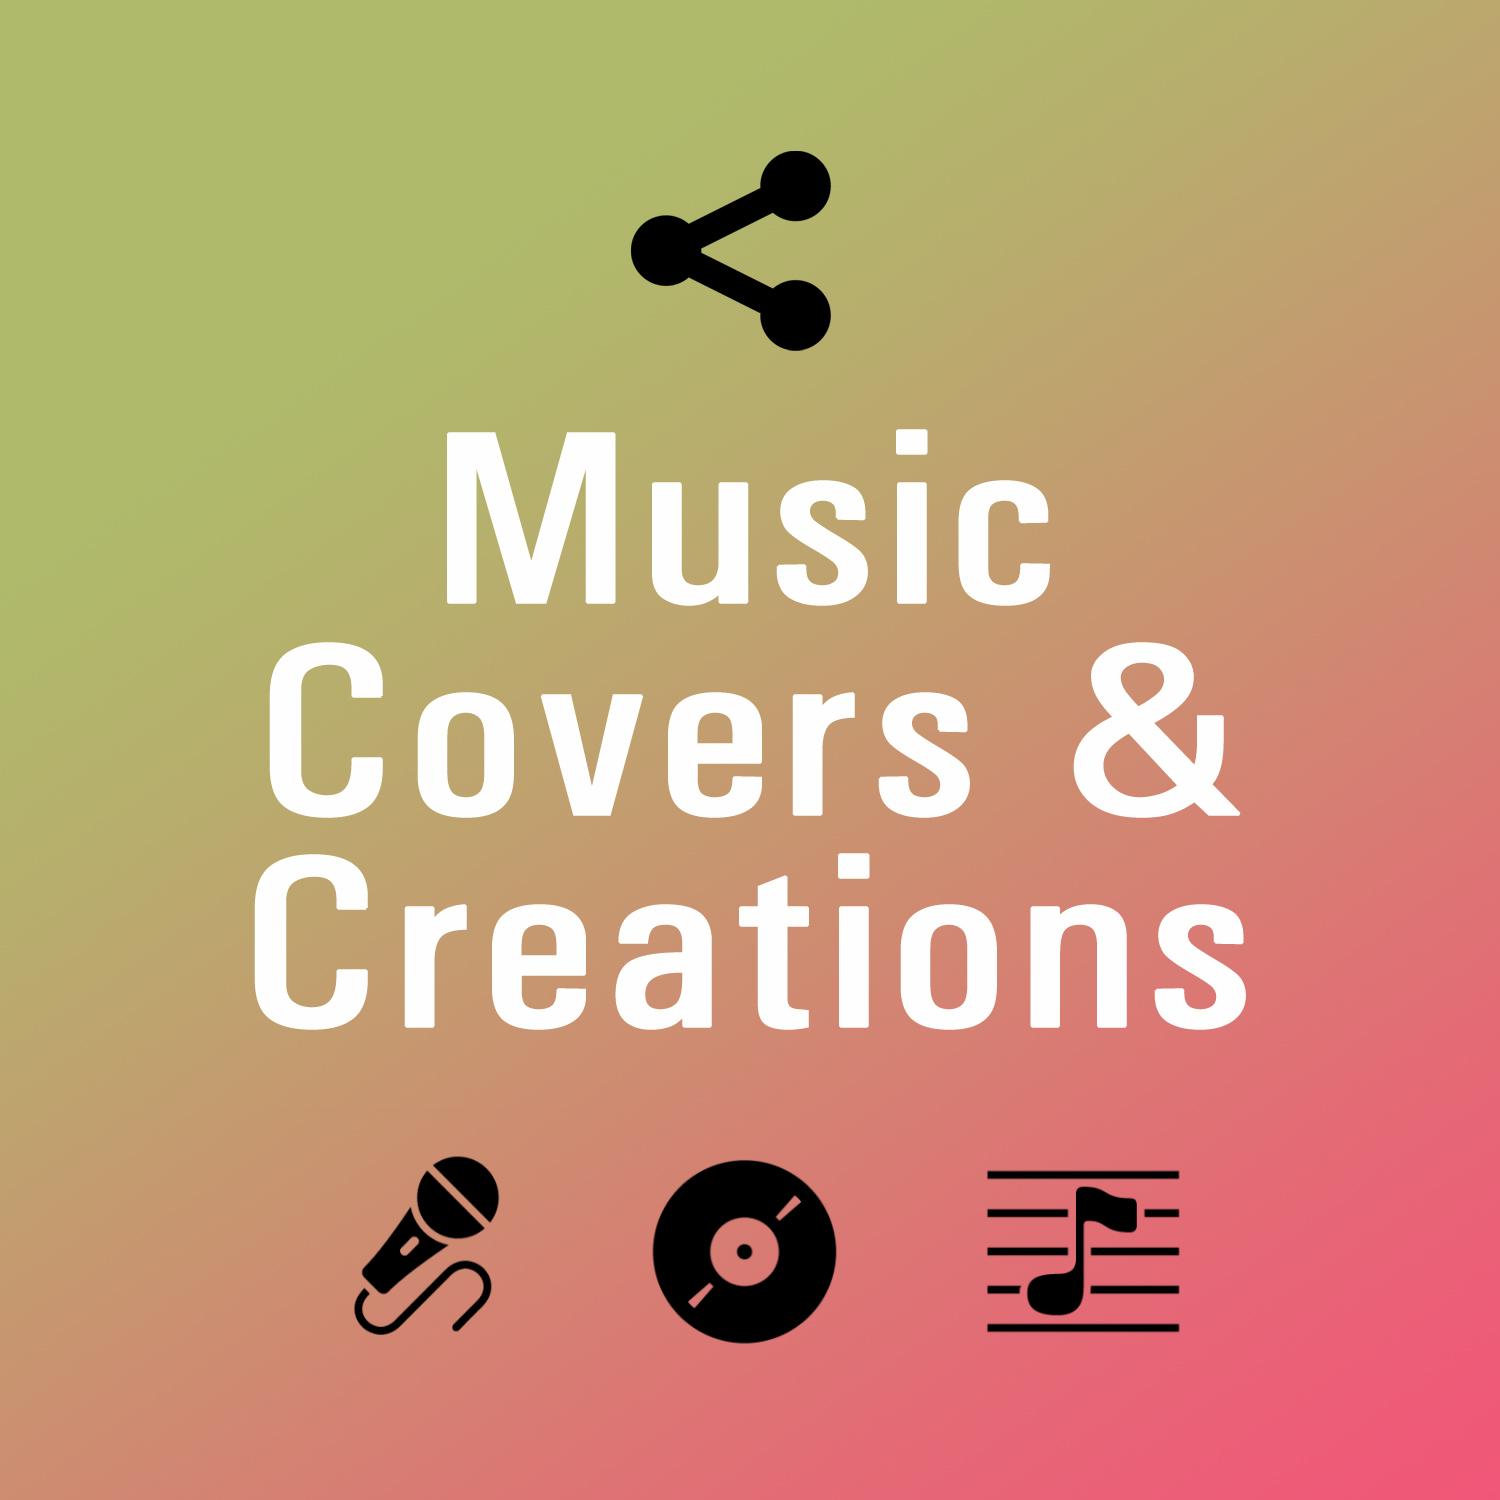 www.music-covers-creations.com